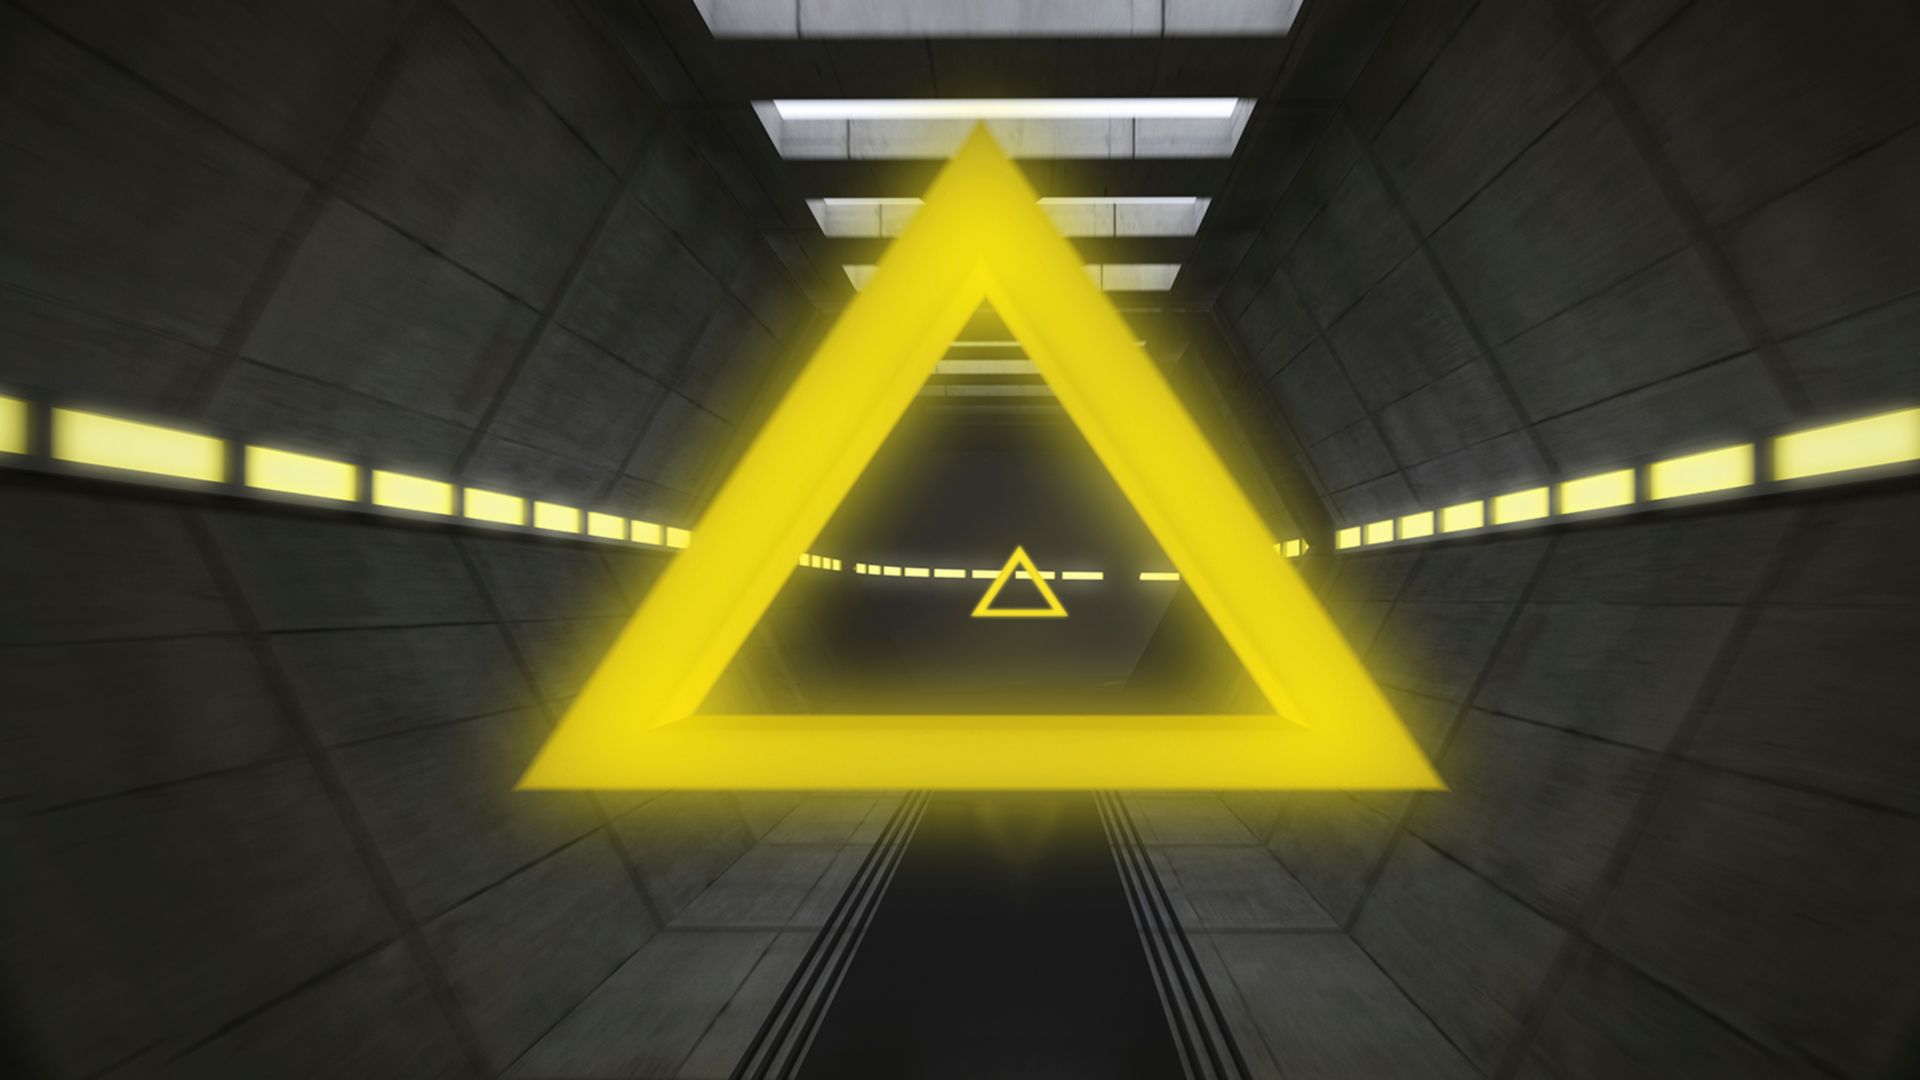 Sika Purform® video through tunnel with yellow triangles